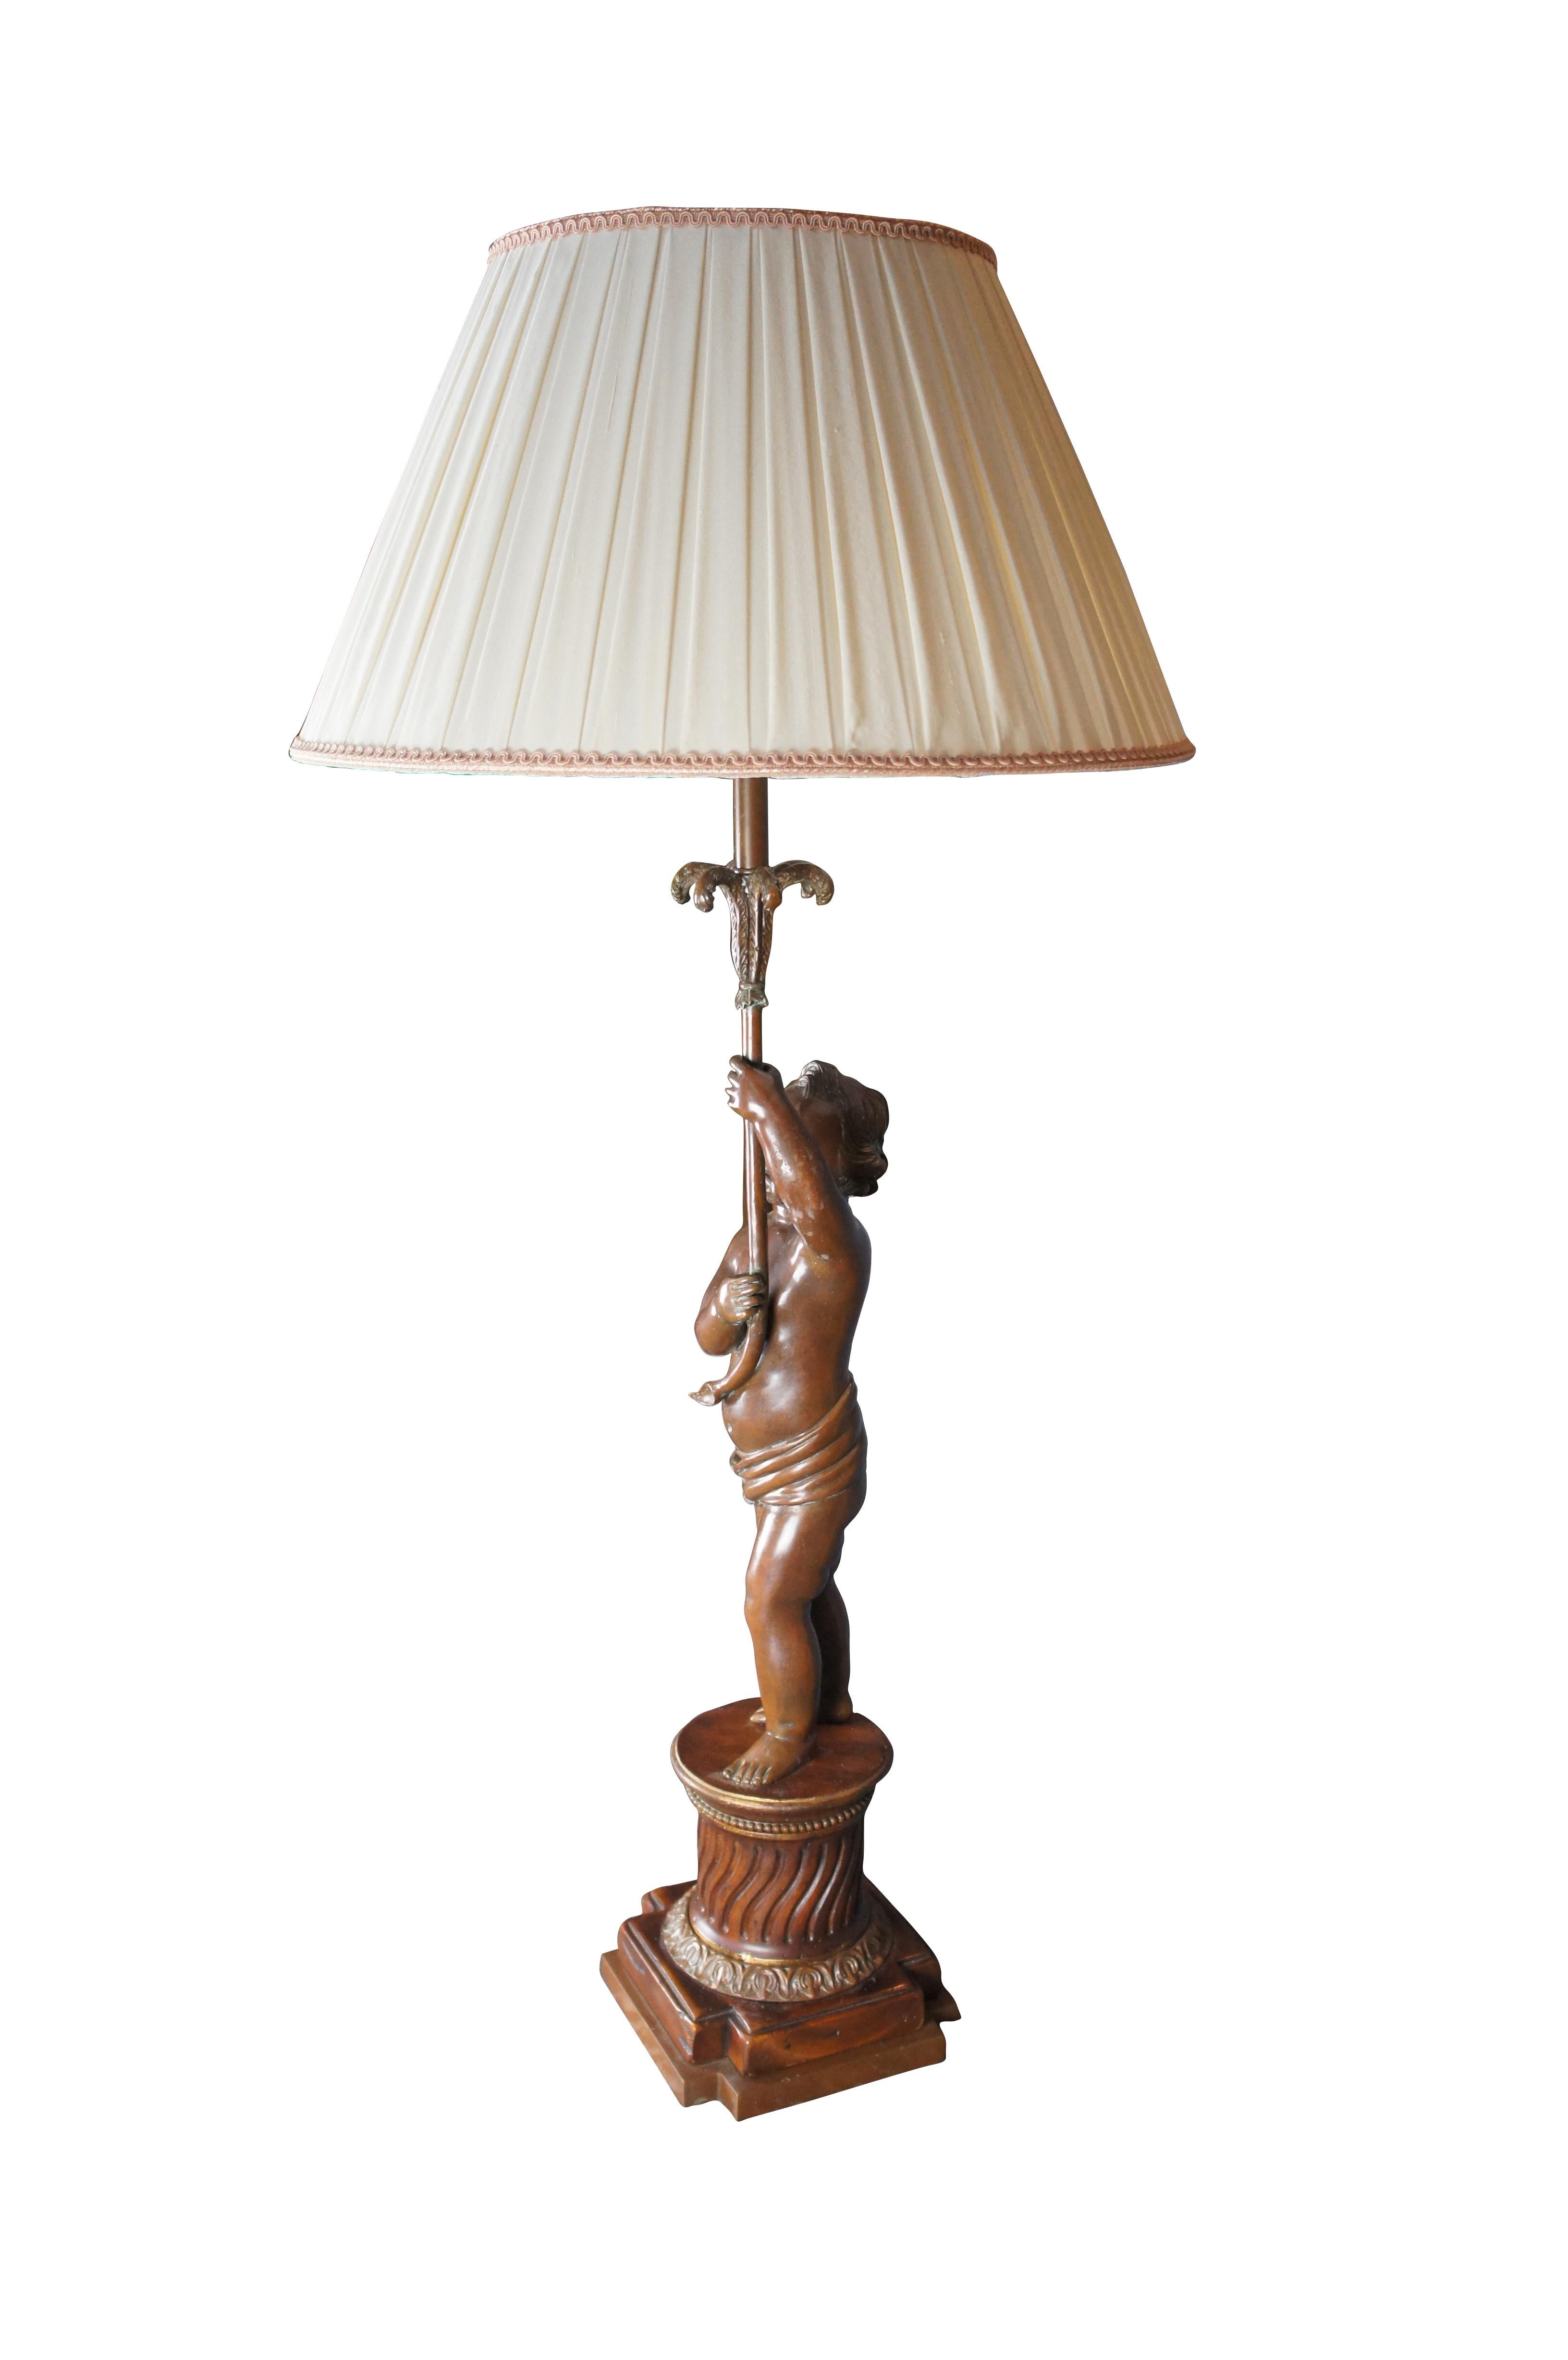 Vintage French Art Nouveau Style Bronze Cherub Table Lamp Mahogany Carved Base In Good Condition For Sale In Dayton, OH